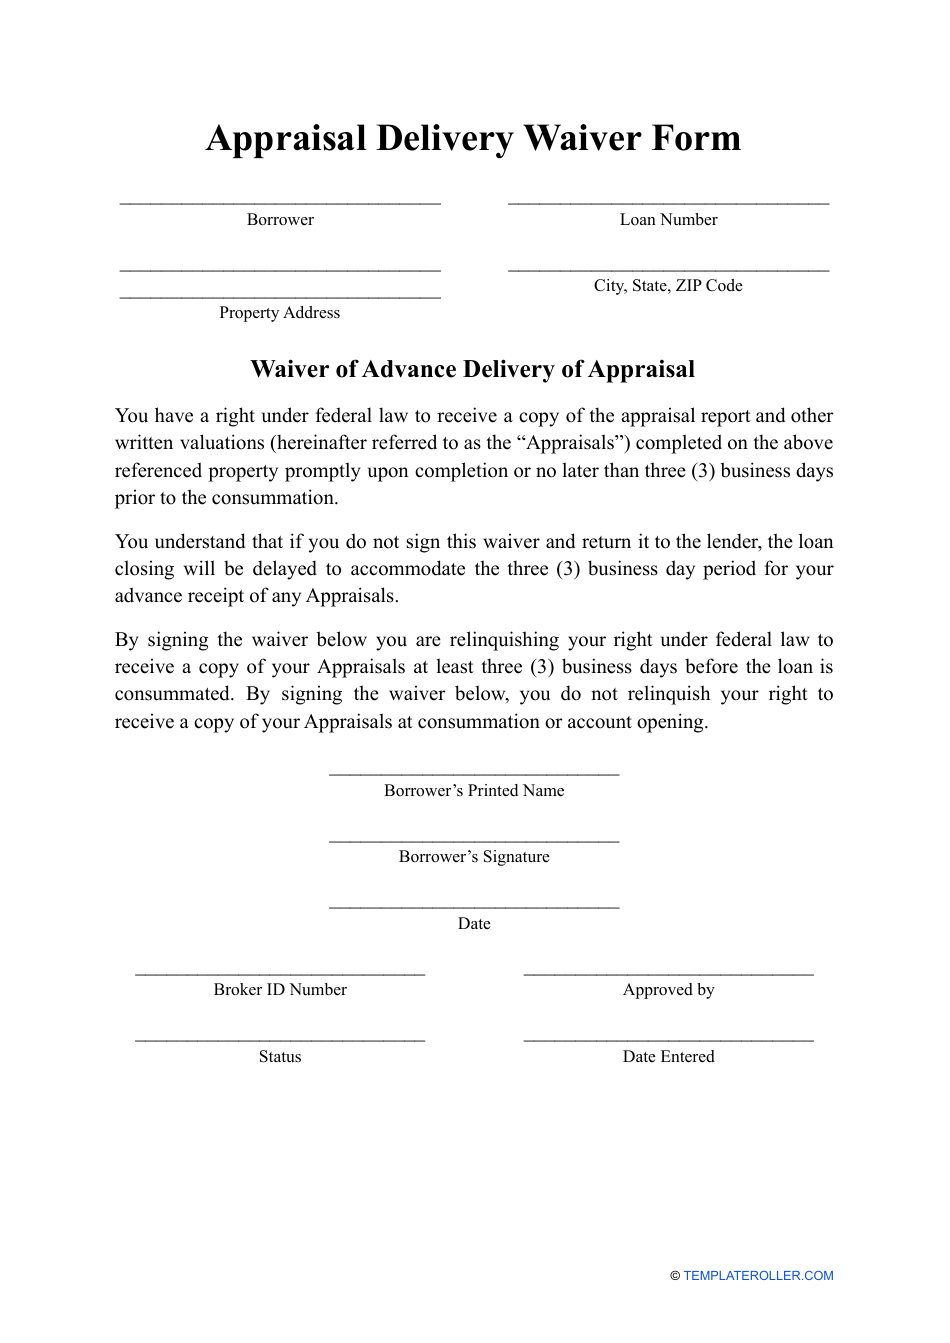 Appraisal Delivery Waiver Form, Page 1